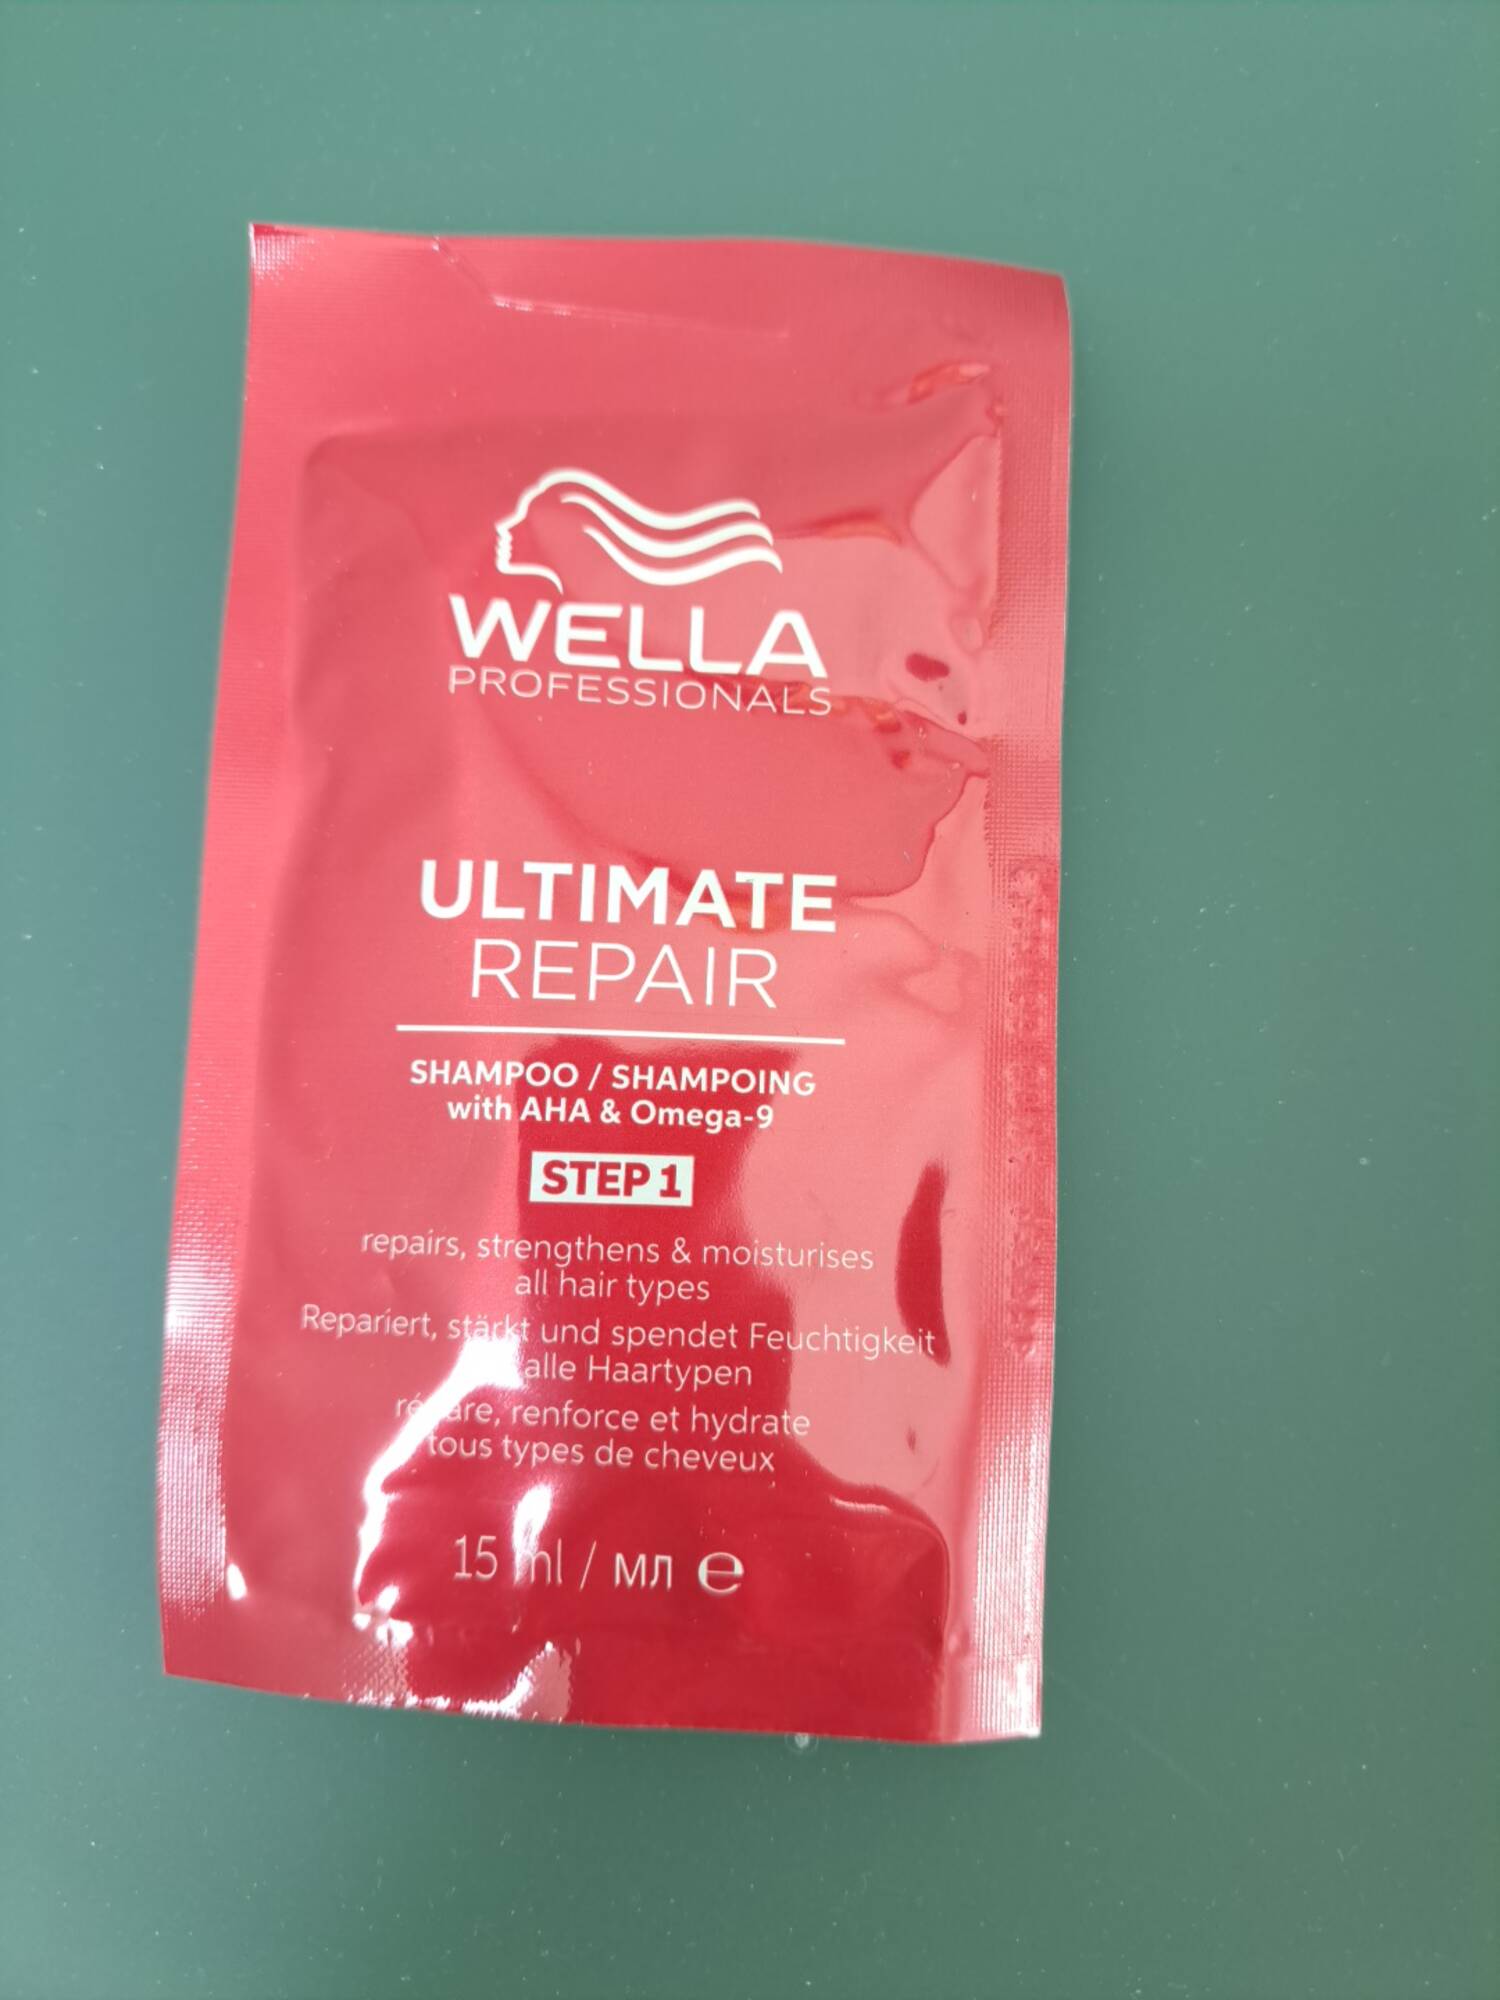 WELLA PROFESSIONALS - Ultimate repair - Shampoing step 1